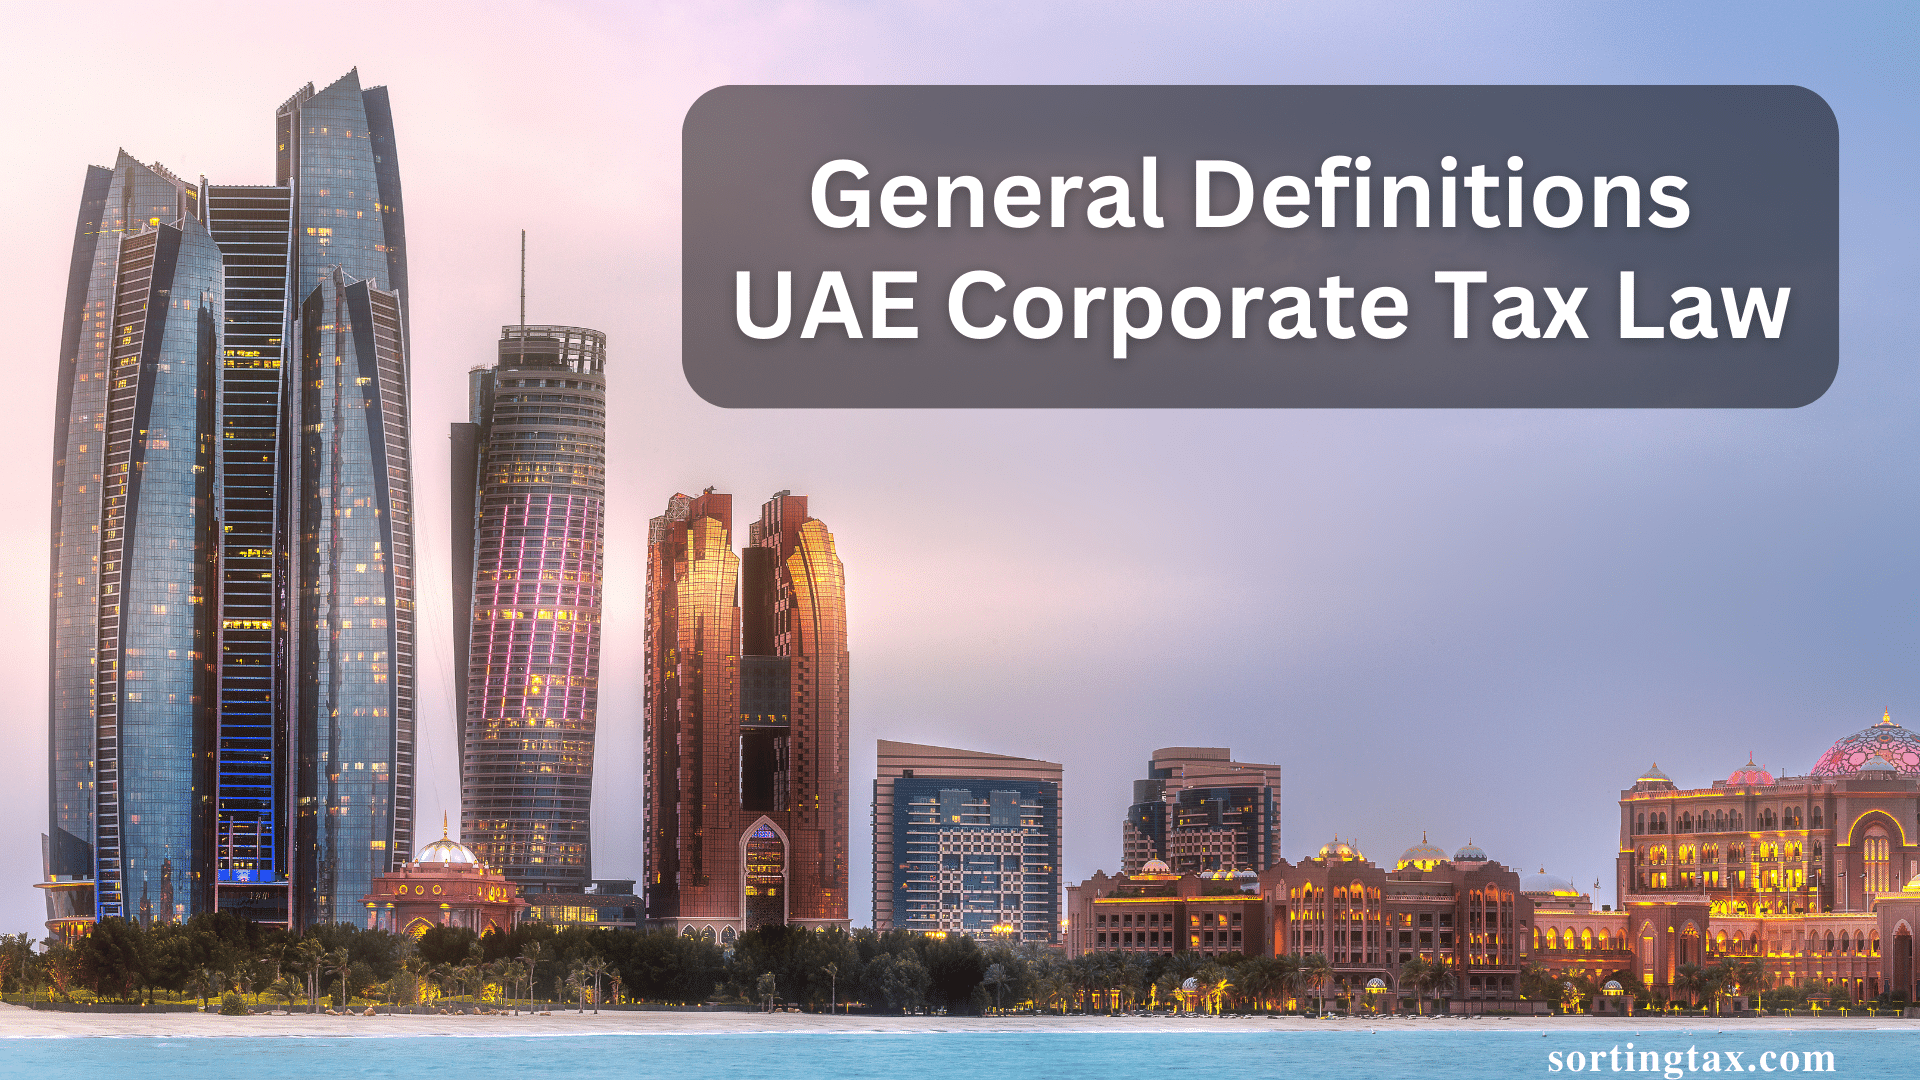 General Definitions under UAE Corporate Tax Law